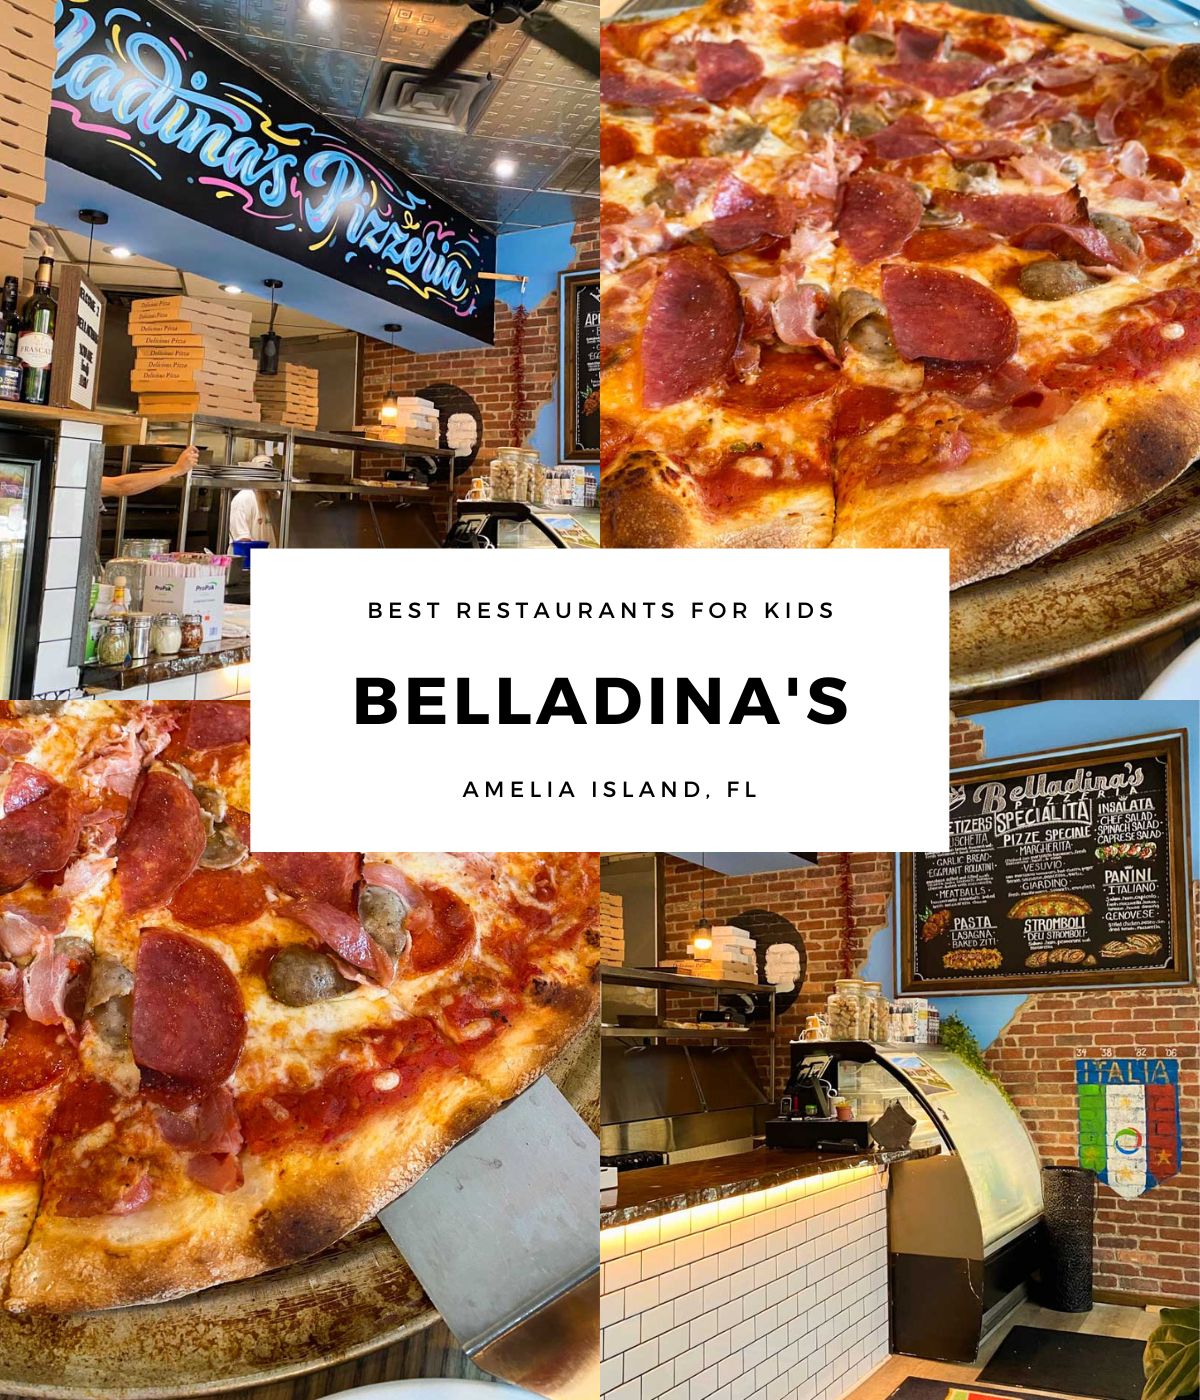 Photo collage shows the pizza and ordering counter at Belladina's.